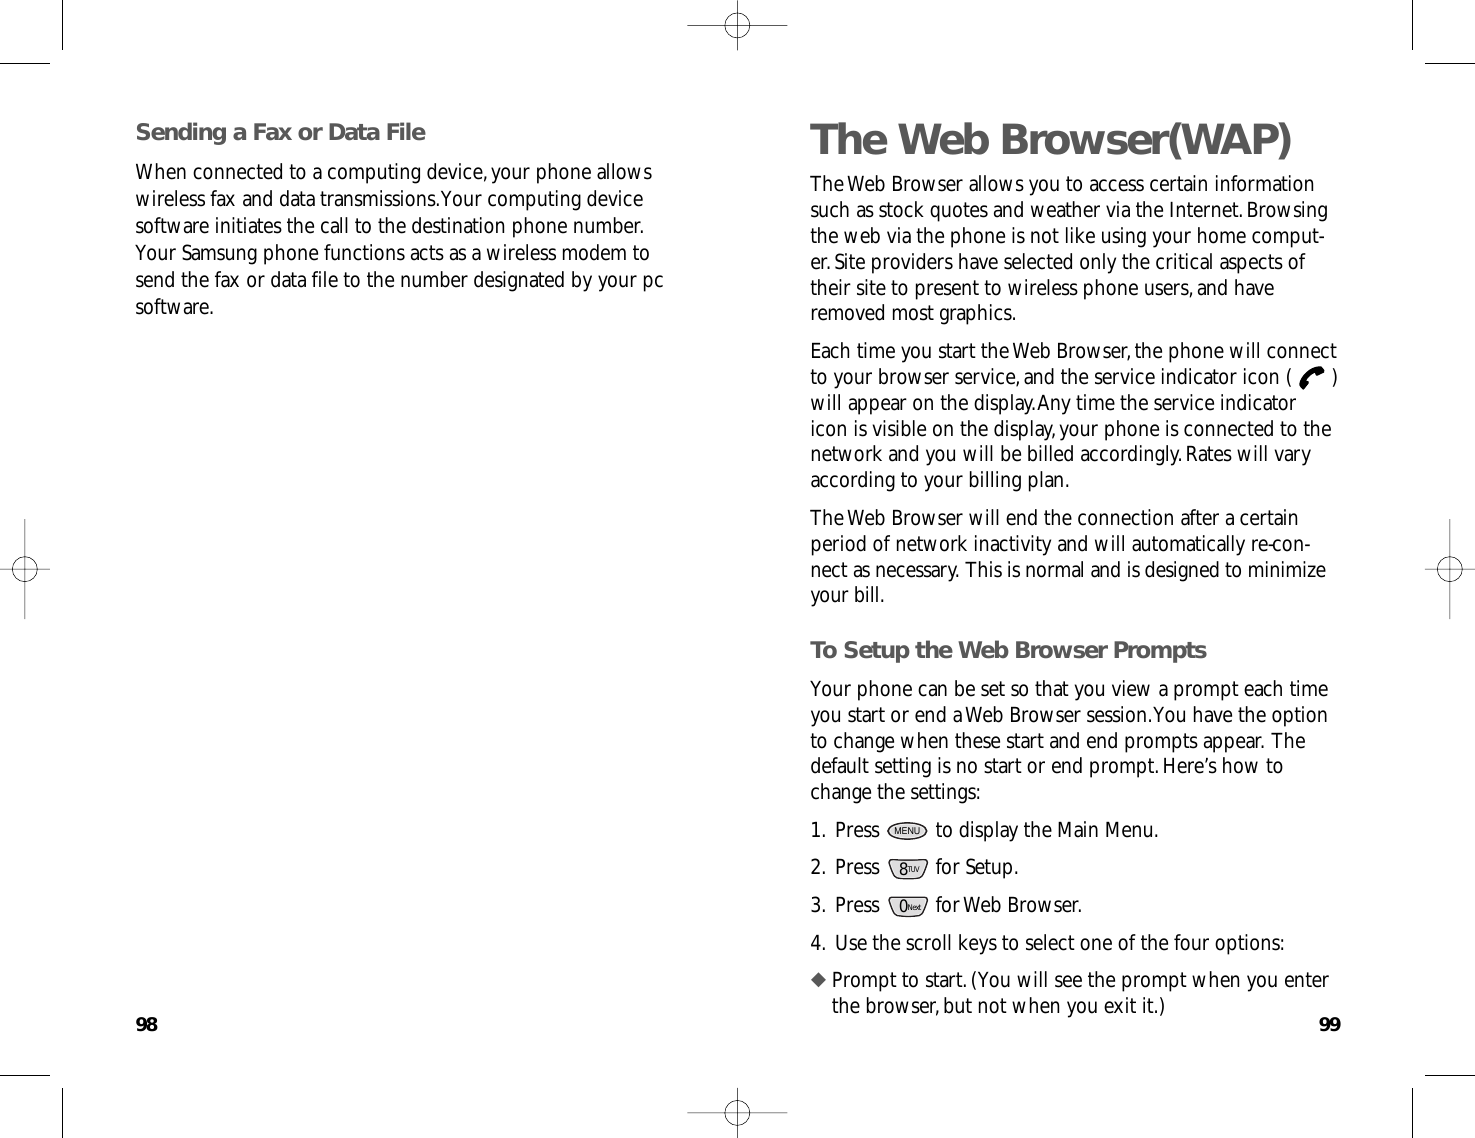 9998The Web Browser(WAP)The Web Browser allows you to access certain informationsuch as stock quotes and weather via the Internet.Browsingthe web via the phone is not like using your home comput-er.Site providers have selected only the critical aspects oftheir site to present to wireless phone users,and haveremoved most graphics.Each time you start the Web Browser,the phone will connectto your browser service,and the service indicator icon ( )will appear on the display.Any time the service indicatoricon is visible on the display,your phone is connected to thenetwork and you will be billed accordingly.Rates will varyaccording to your billing plan.The Web Browser will end the connection after a certainperiod of network inactivity and will automatically re-con-nect as necessary.This is normal and is designed to minimizeyour bill.To Setup the Web Browser PromptsYour phone can be set so that you view a prompt each timeyou start or end a Web Browser session.You have the optionto change when these start and end prompts appear.Thedefault setting is no start or end prompt.Here’s how tochange the settings:1.Press  to display the Main Menu.2.Press for Setup.3.Press for Web Browser.4.Use the scroll keys to select one of the four options:◆ Prompt to start.(You will see the prompt when you enterthe browser,but not when you exit it.)0Next8TUVMENUSending a Fax or Data FileWhen connected to a computing device,your phone allowswireless fax and data transmissions.Your computing devicesoftware initiates the call to the destination phone number.Your Samsung phone functions acts as a wireless modem tosend the fax or data file to the number designated by your pcsoftware.